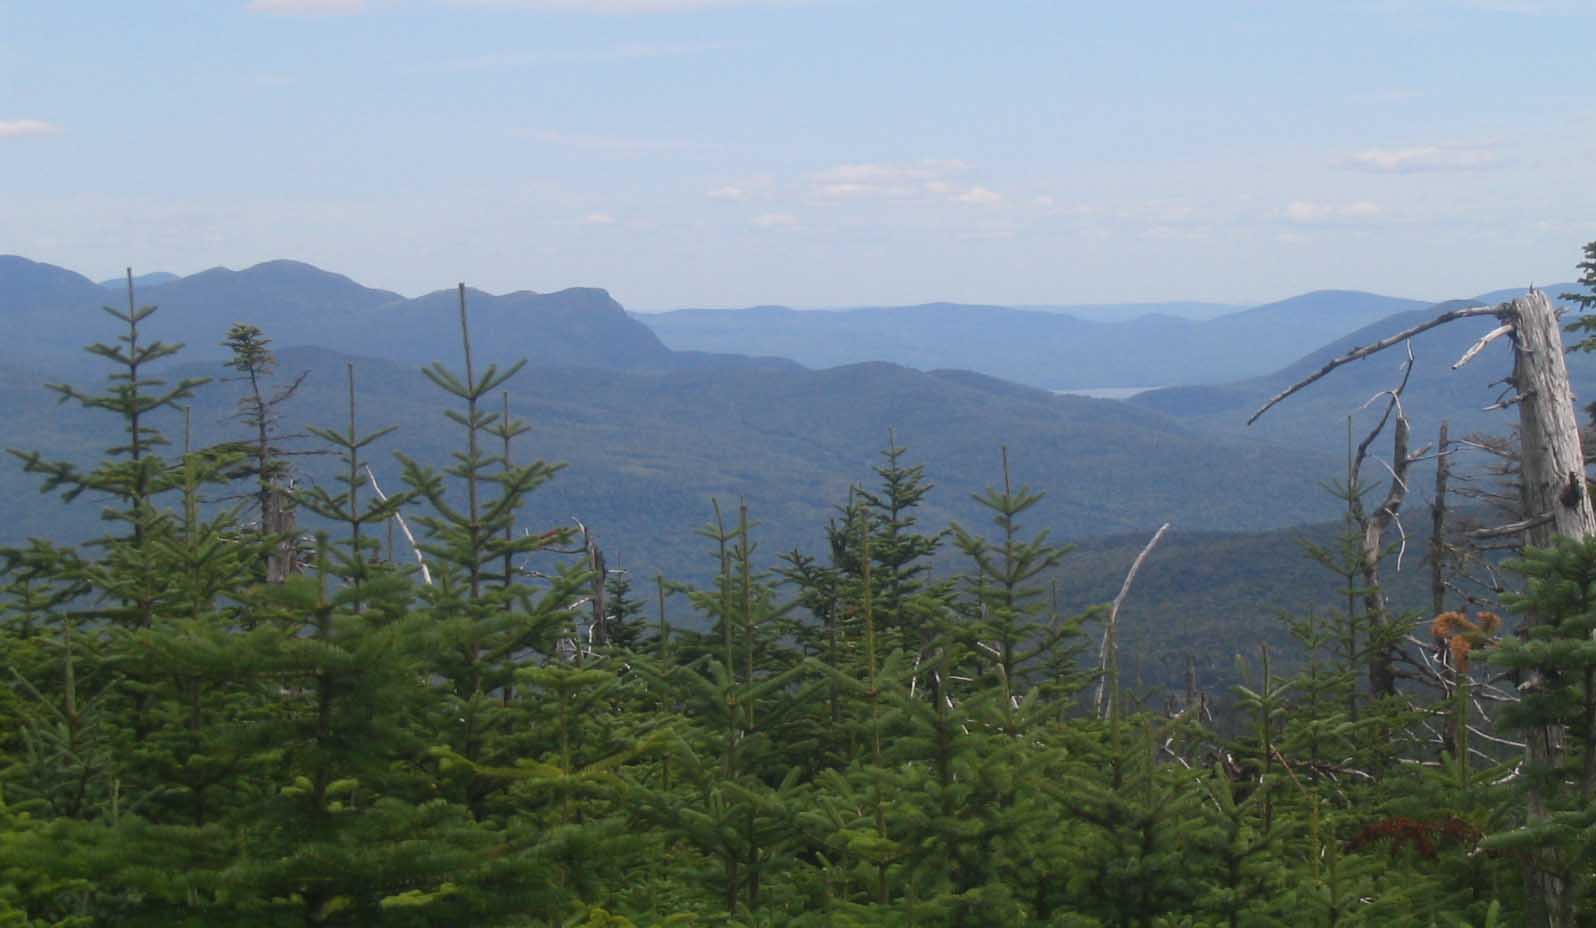 6.3 MM. This view from West Peak of Bemis Mountain (elev. 3,592 feet) includes Jackson and Tumbledown Mountains as well as Little Ellis Pond. Courtesy askus3@optonline.net